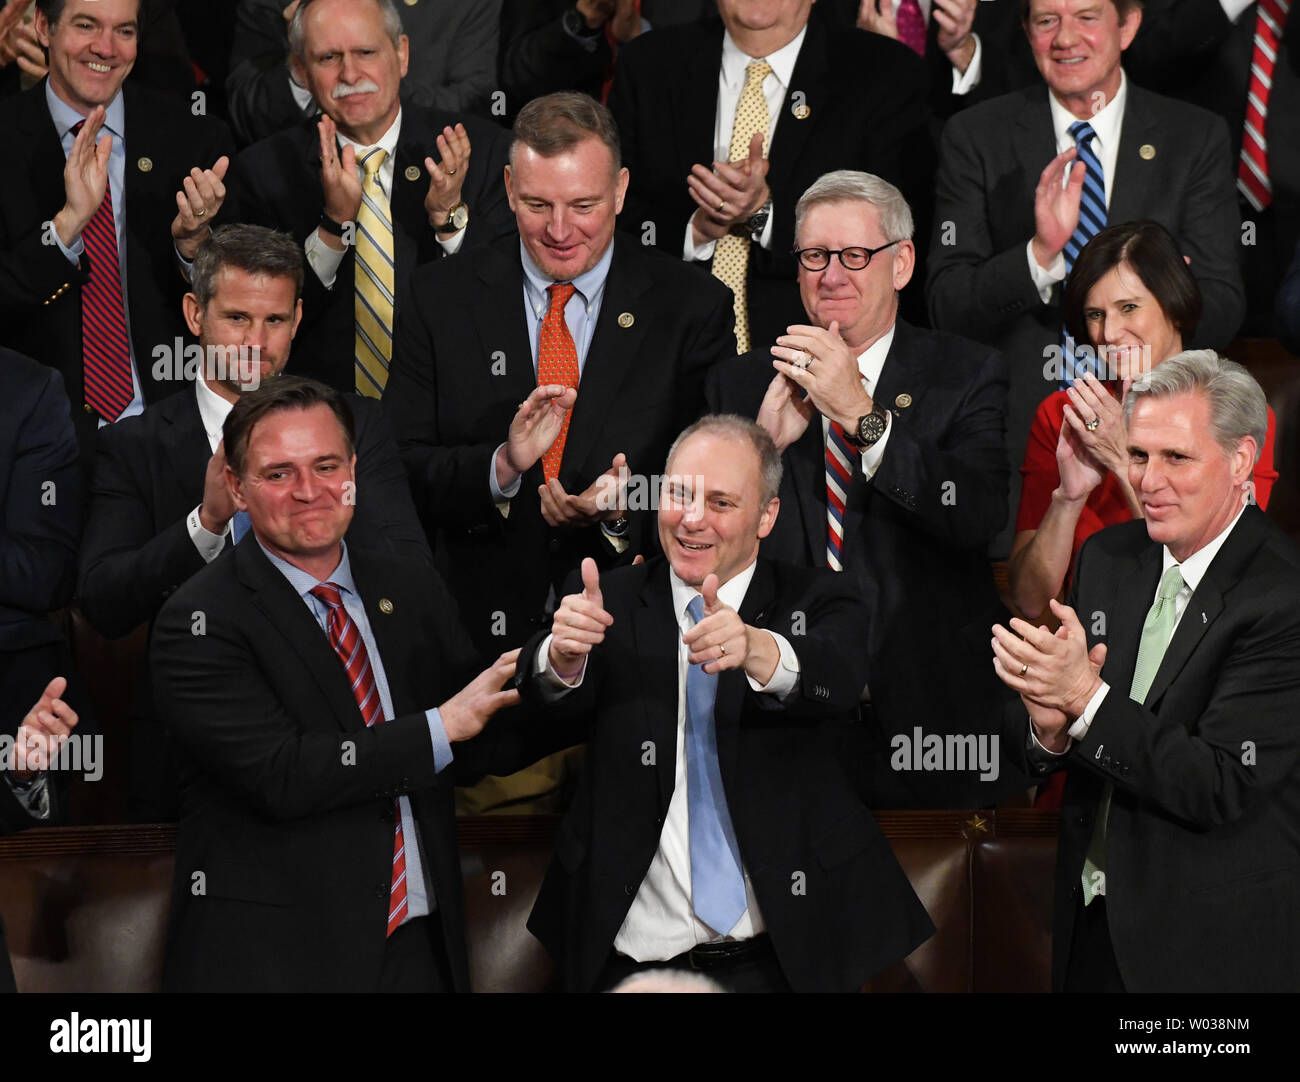 Republican House Majority Whip Steve Scalise gives a thumbs up to President Donald Trump during his State of the Union address to a joint session of Congress in the House Chamber at the U.S. Capitol in Washington, D.C., on January 30, 2018. Trump recognized Scalise for being back to work after being shot at practice for a Congressional baseball game. Photo by Pat Benic/UPI Stock Photo